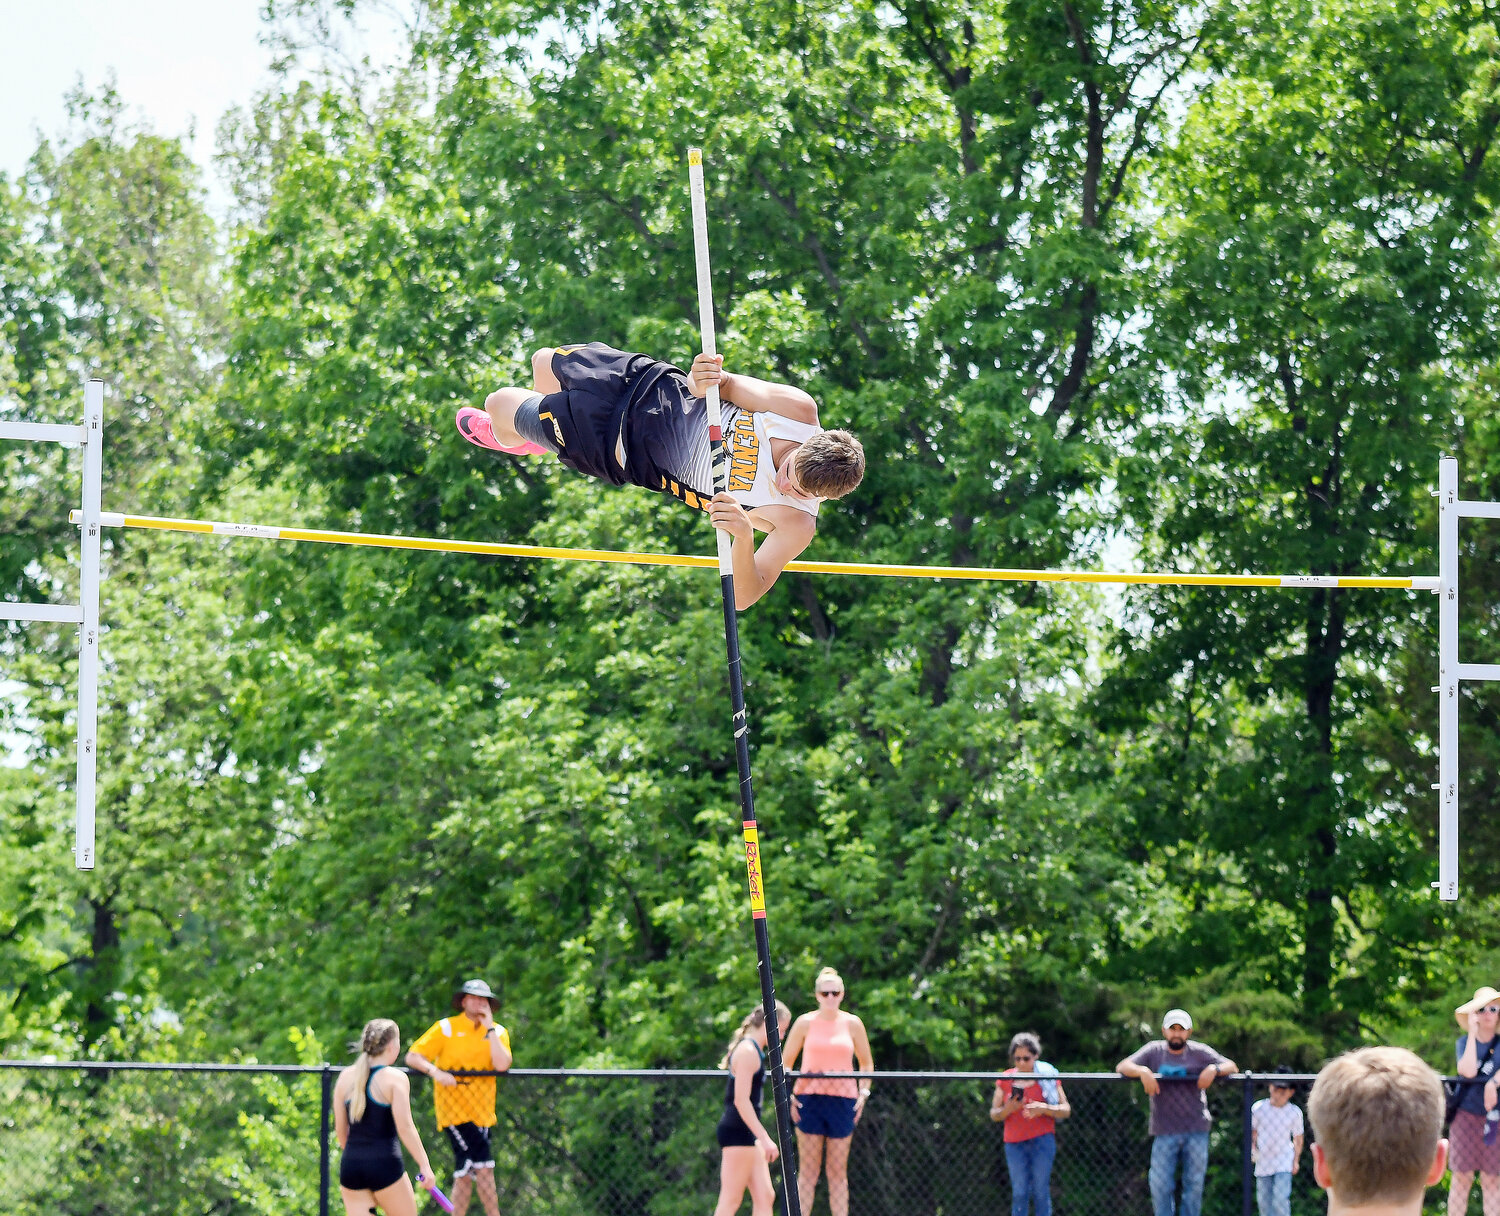 Gavin Schwartze clears the bar during Saturday’s MSHSAA Class 1, Sectional 1 Track Meet at New Haven High School. He placed second in the event to advance to state this weekend in Jefferson City.